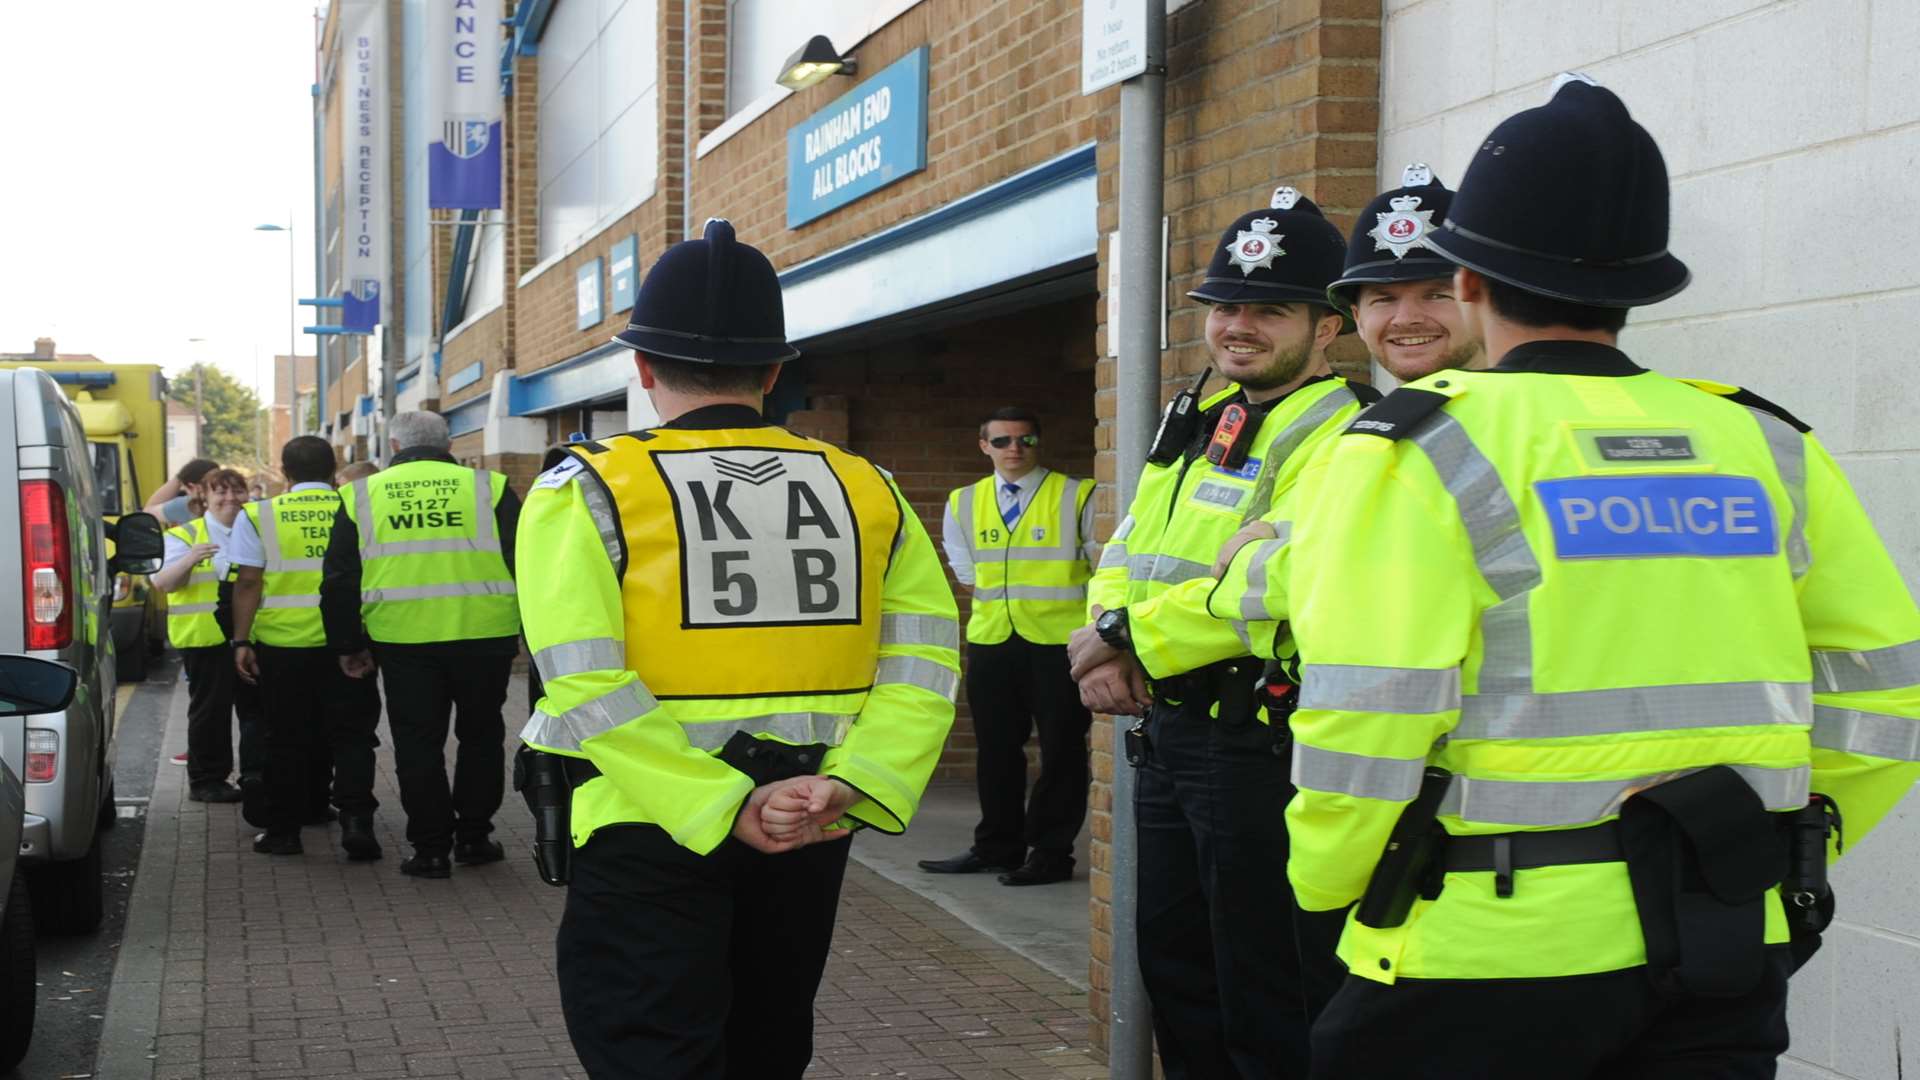 Police on duty at Priestfield during the Gillingham versus Millwall match Picture: Steve Crispe